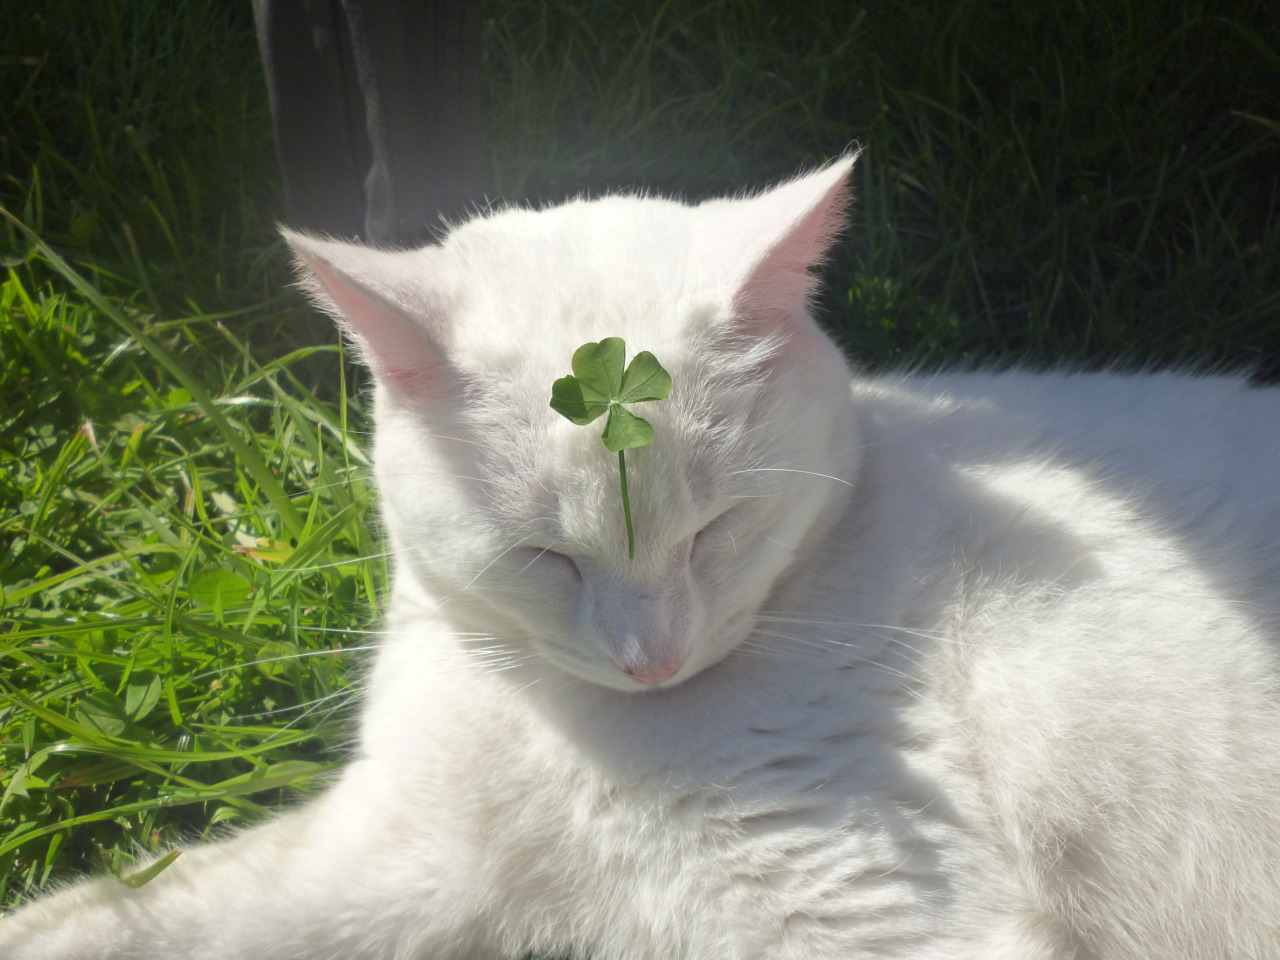 buckobarns:  This is the lucky clover cat. reblog this in 30 seconds &amp; he